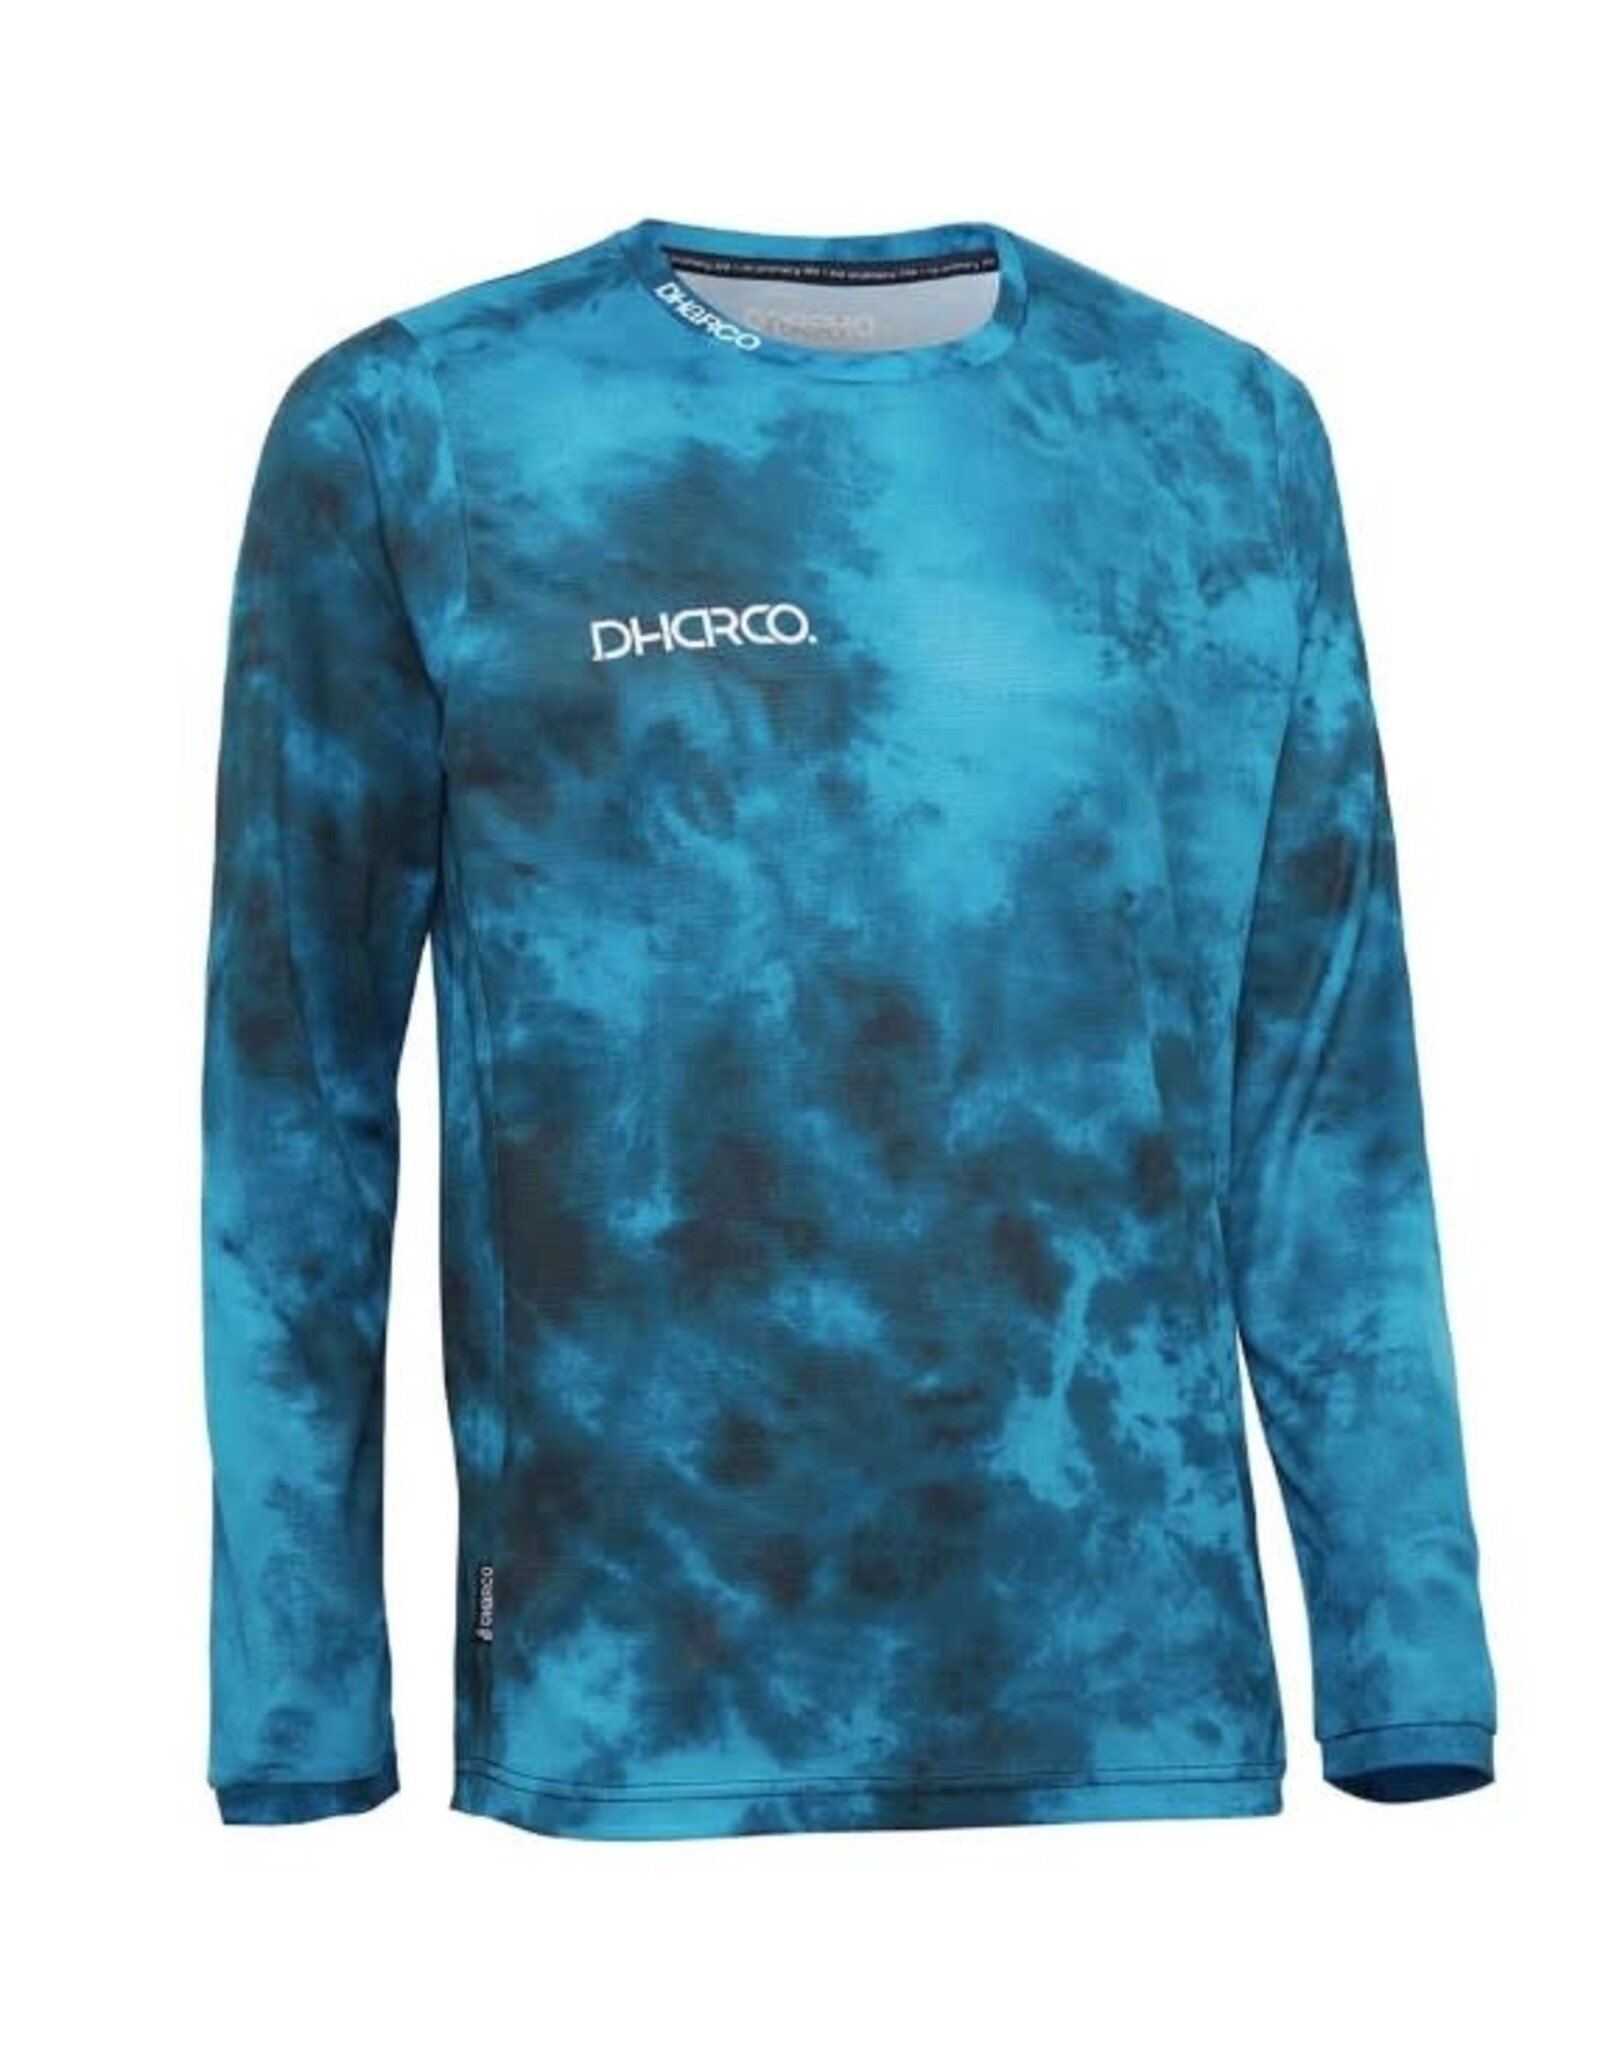 Dharco Jersey DHarco Gravity Mens